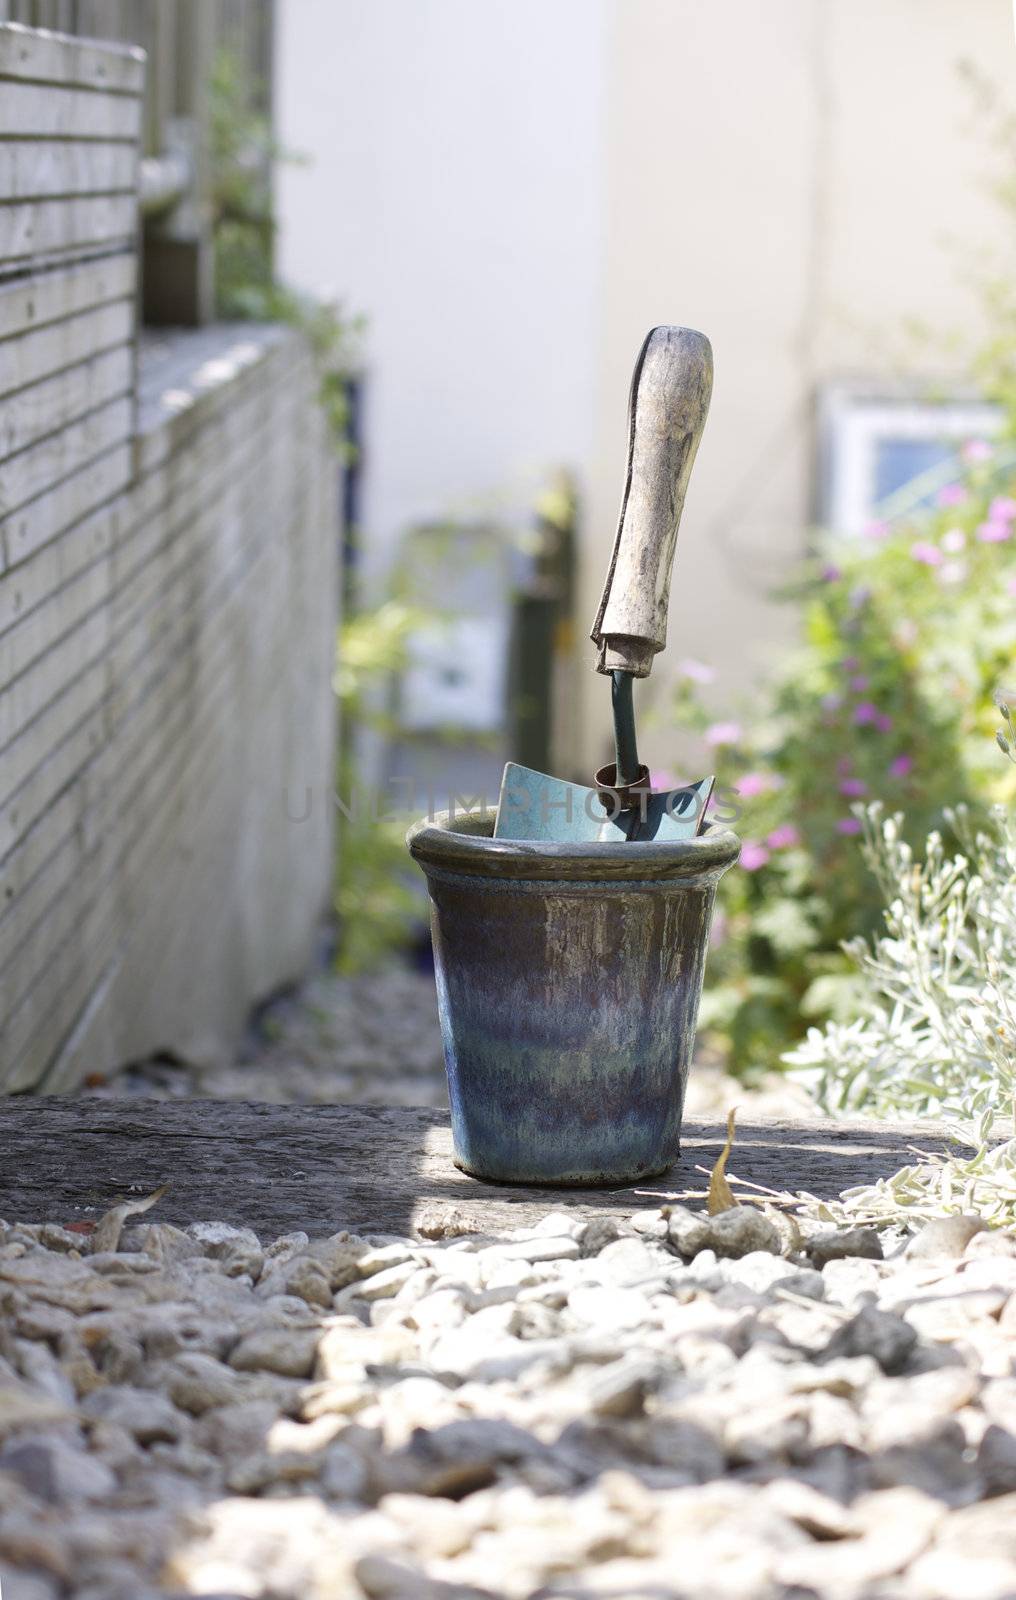 A small hand held trowel with a wooden handle, standing in a glazed blue coloured plant pot. A low angled view looking down a stoney garden path with wooden decking to left of image.